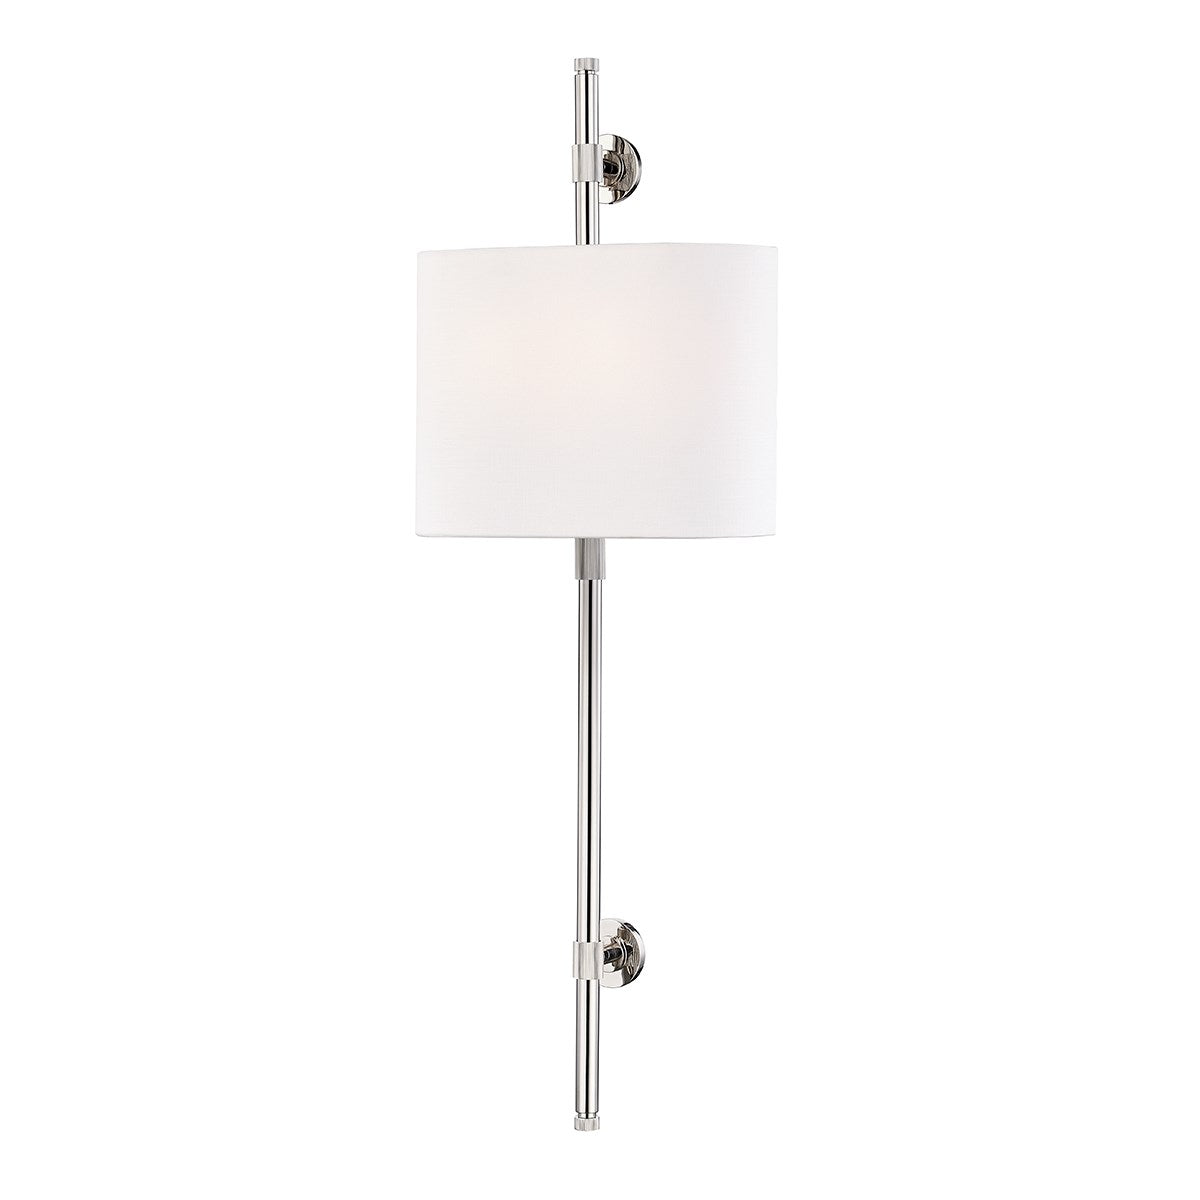 Bowery - 2 LIGHT WALL SCONCE Wall Light Fixtures Hudson Valley Lighting Polished Nickel  